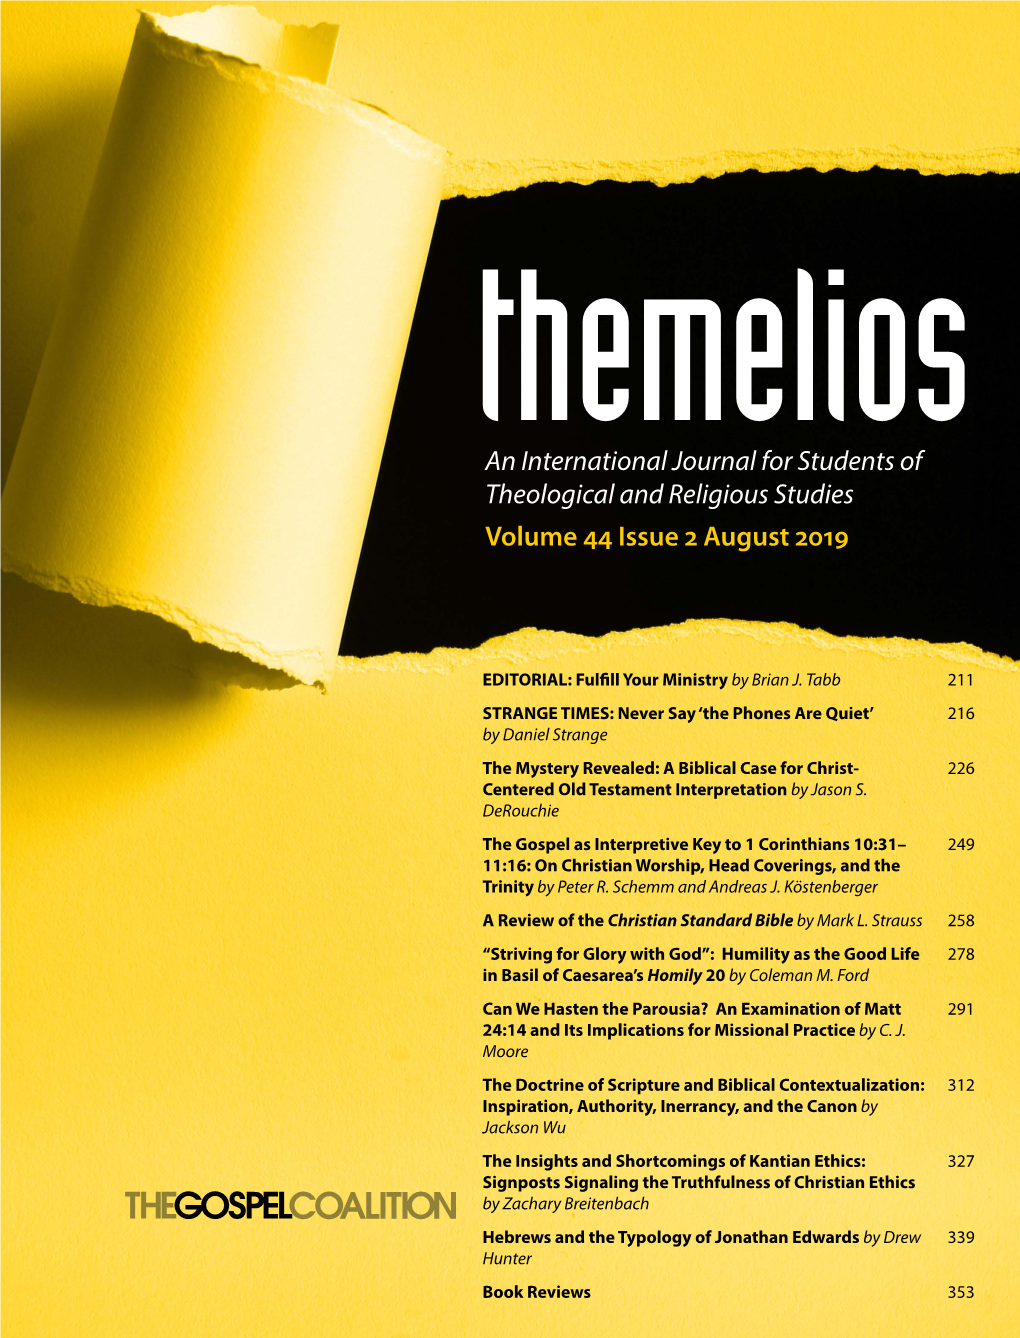 An International Journal for Students of Theological and Religious Studies Volume 44 Issue 2 August 2019